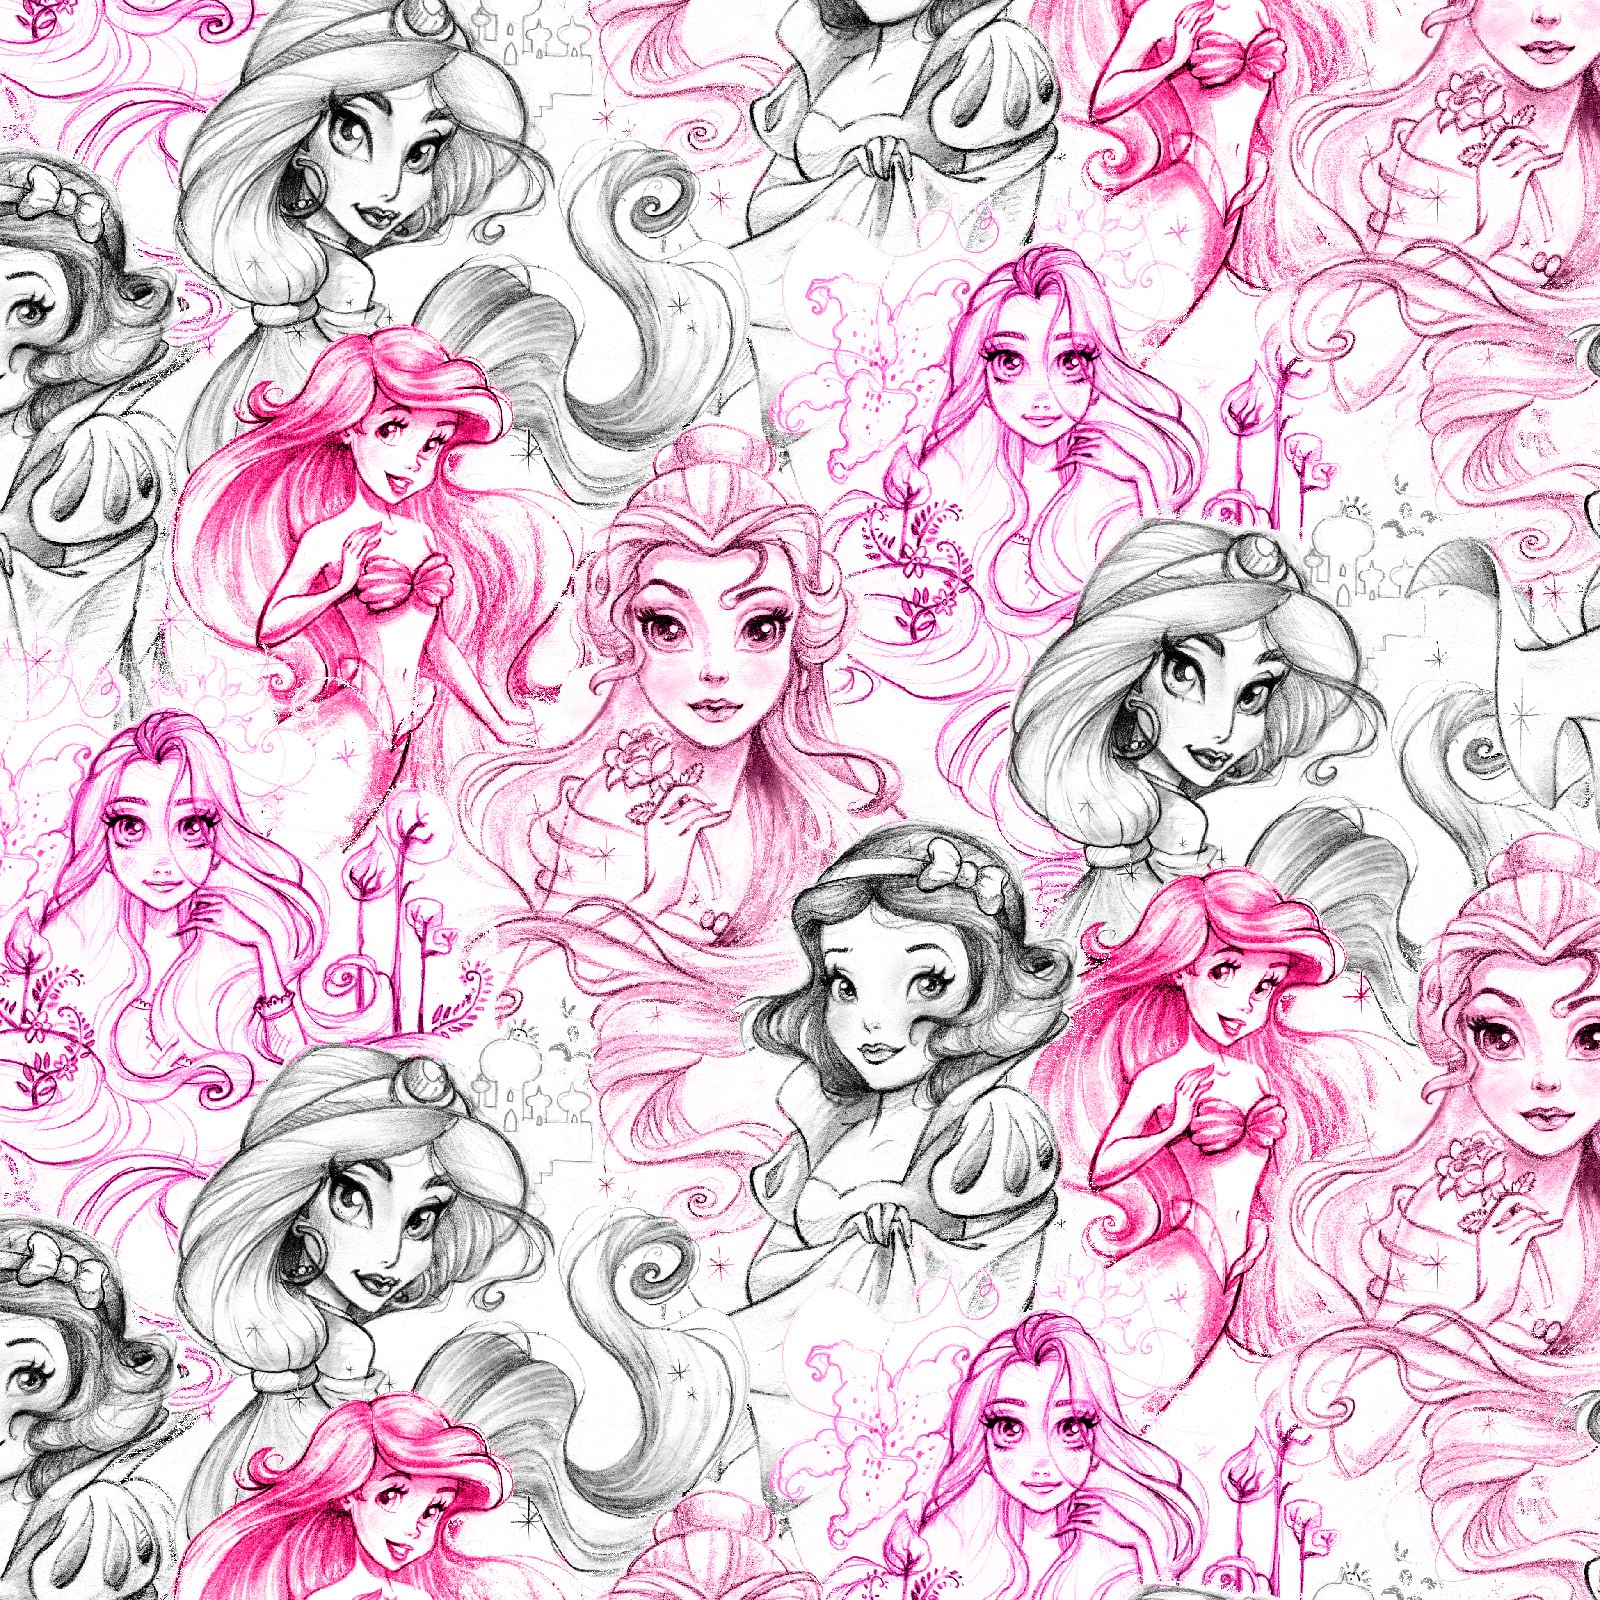 Download Get the Disney® Enchanting Stories Princess Sketch Cotton Fabric at Michaels